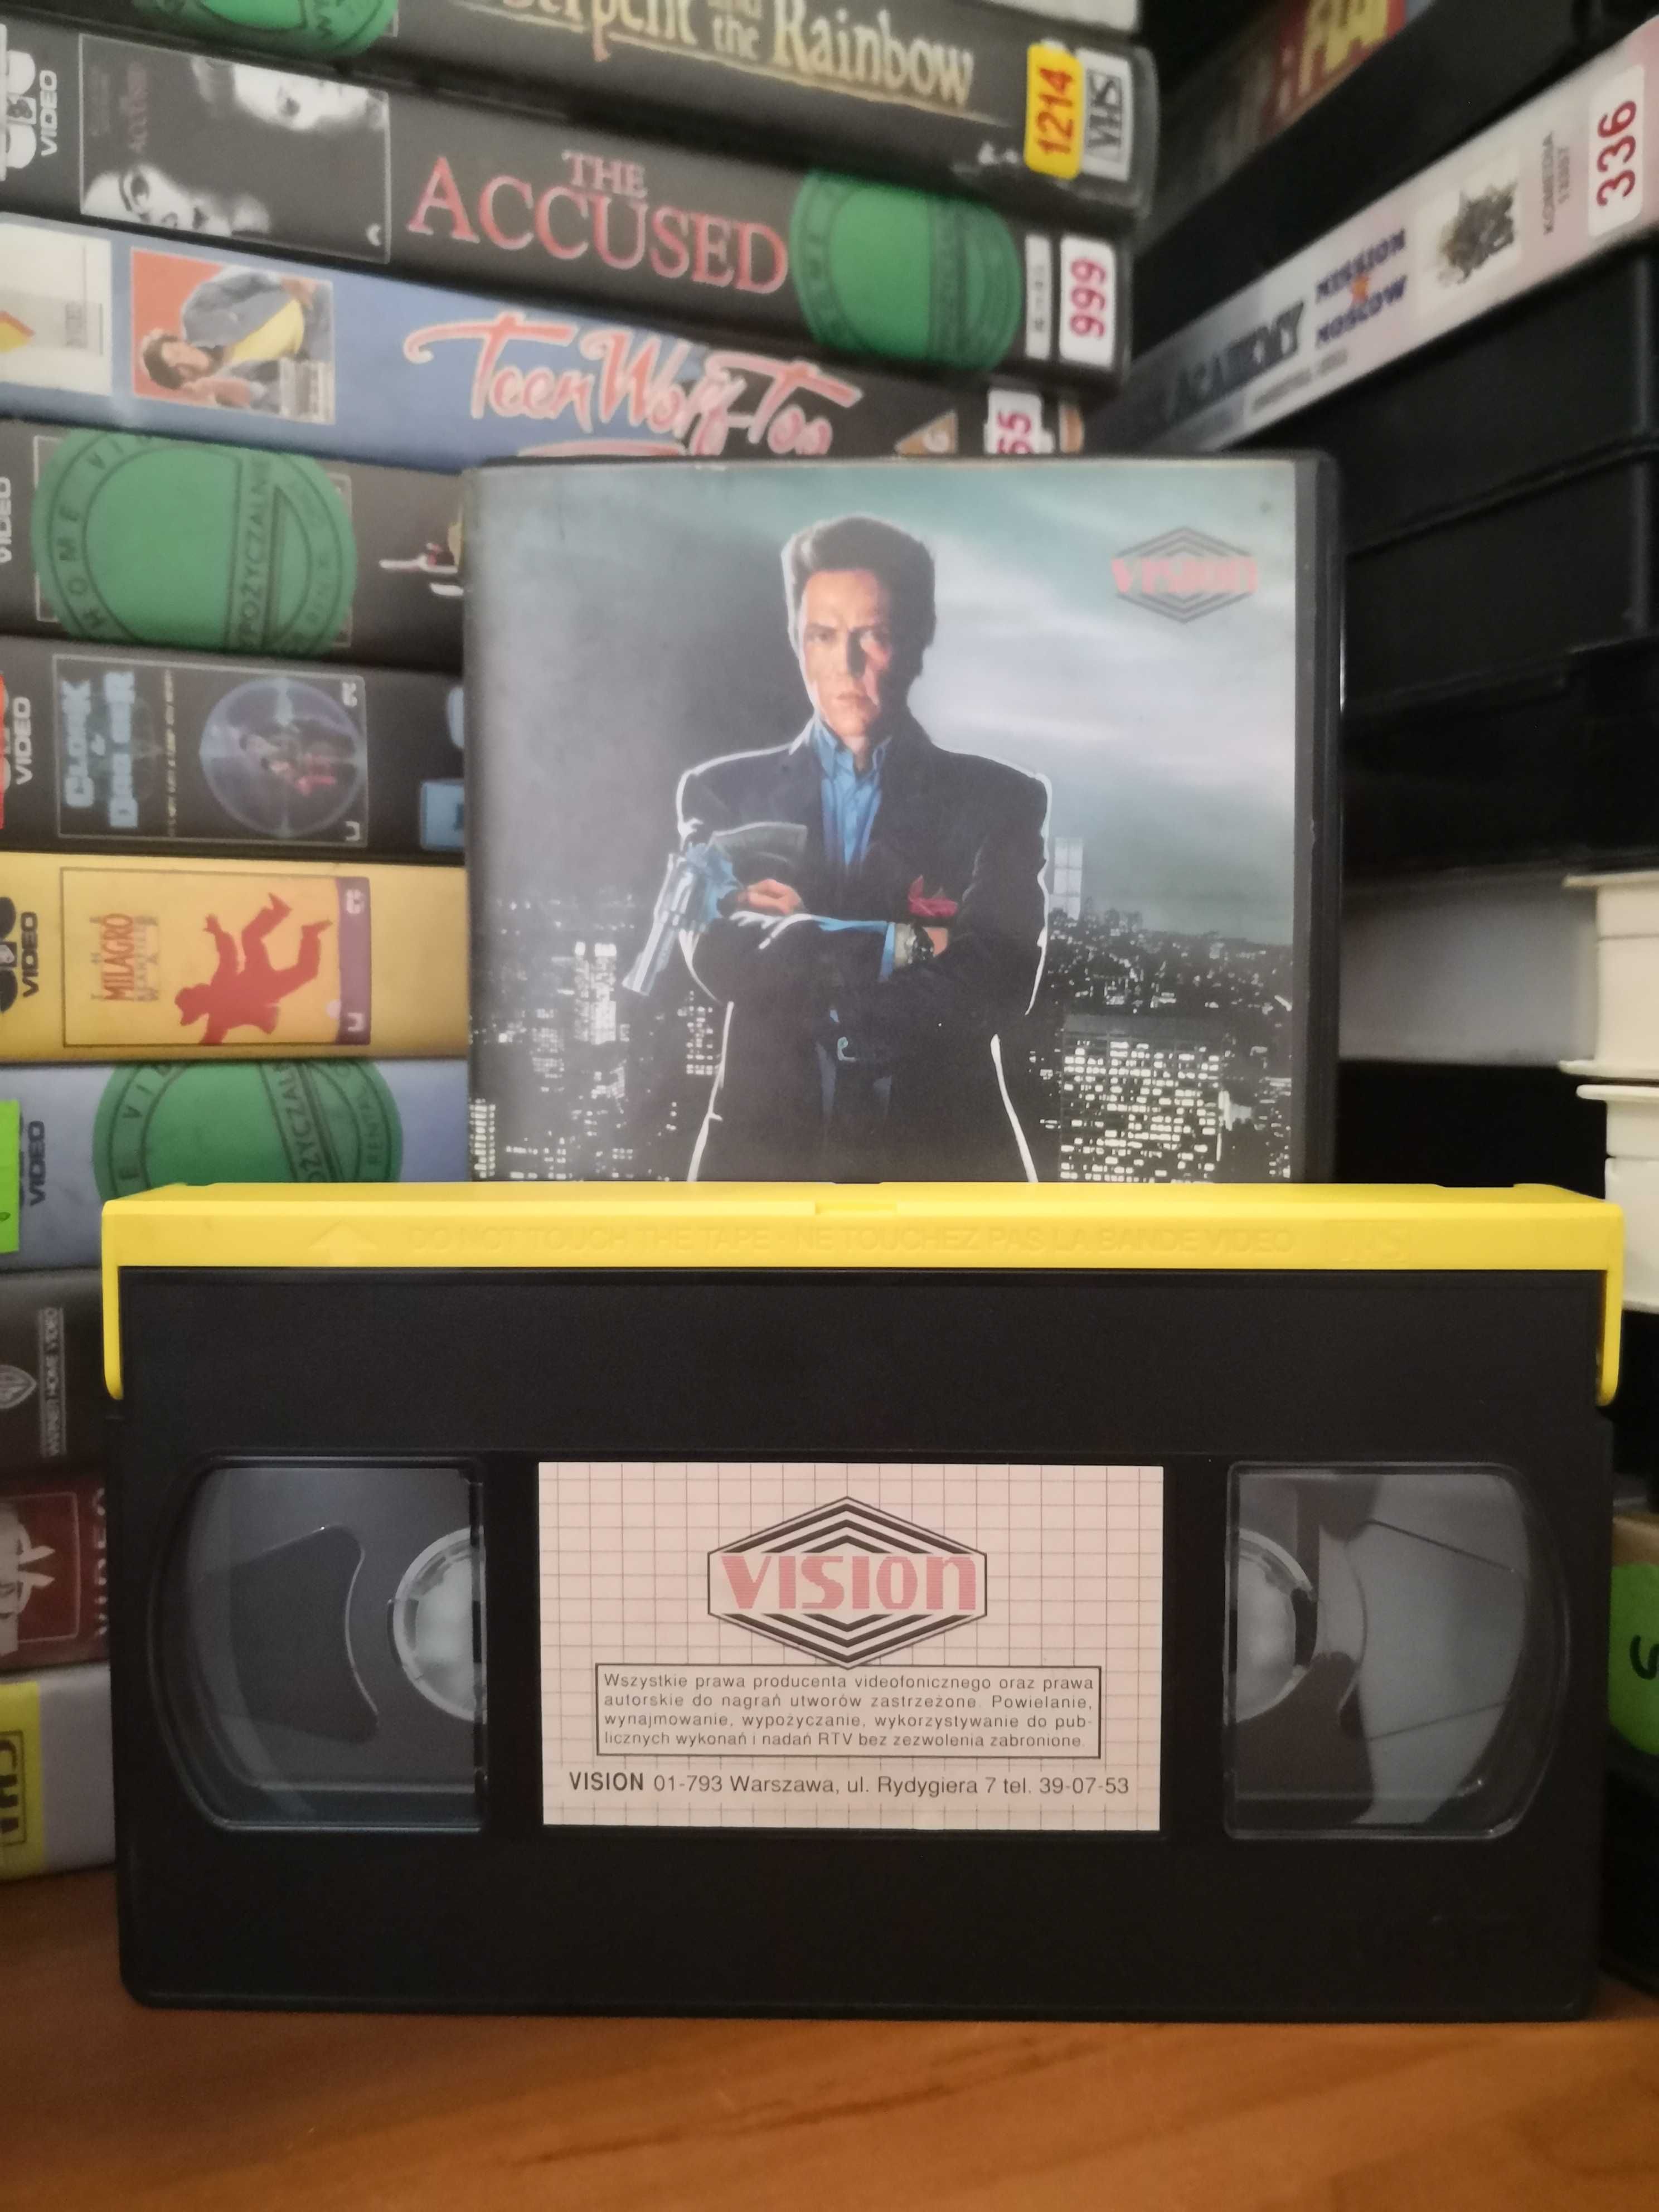 The King of New York VHS Vision